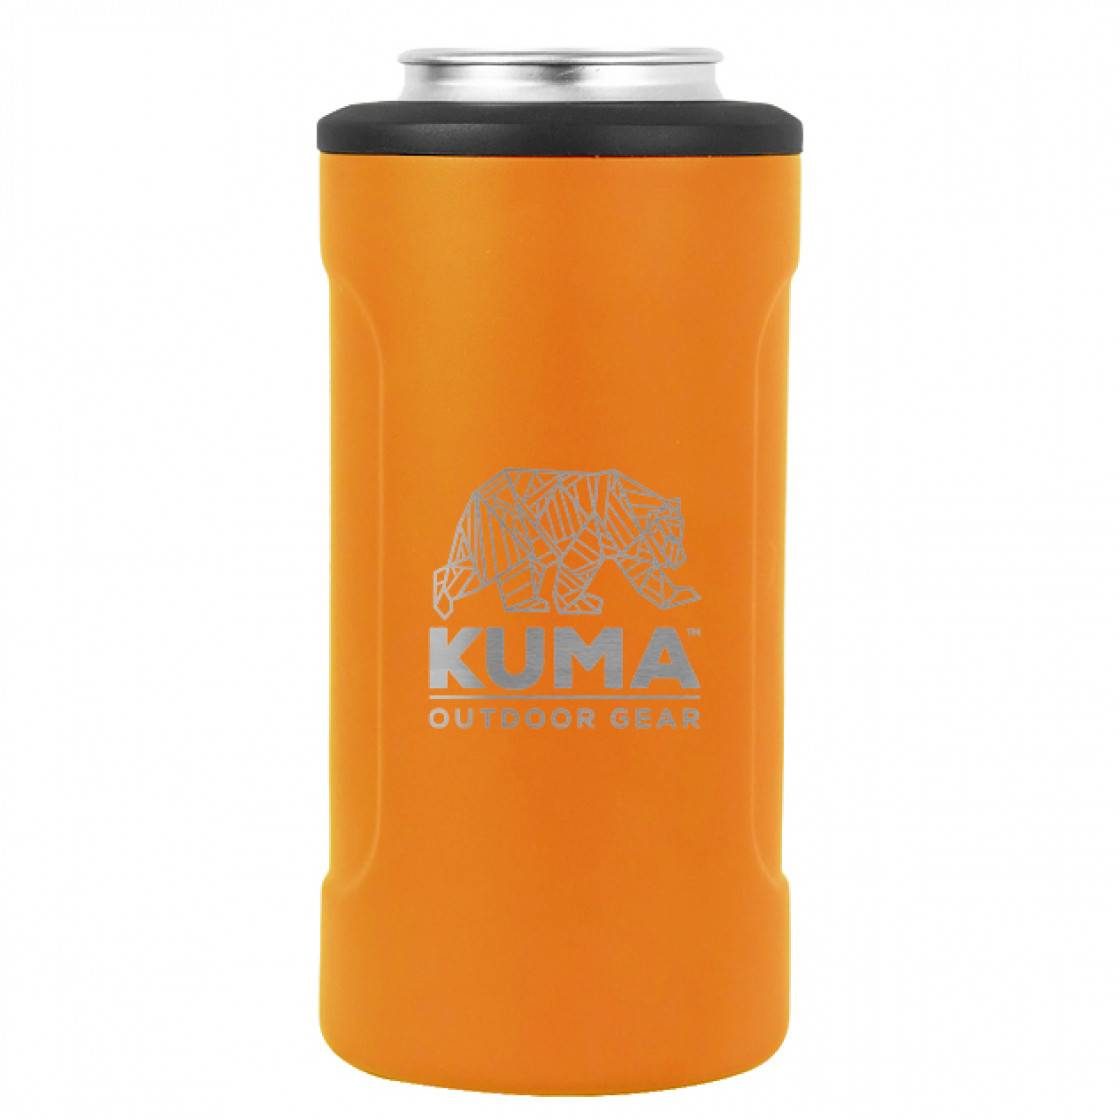 3-in-1 Coozie | KUMA™ Outdoor Gear